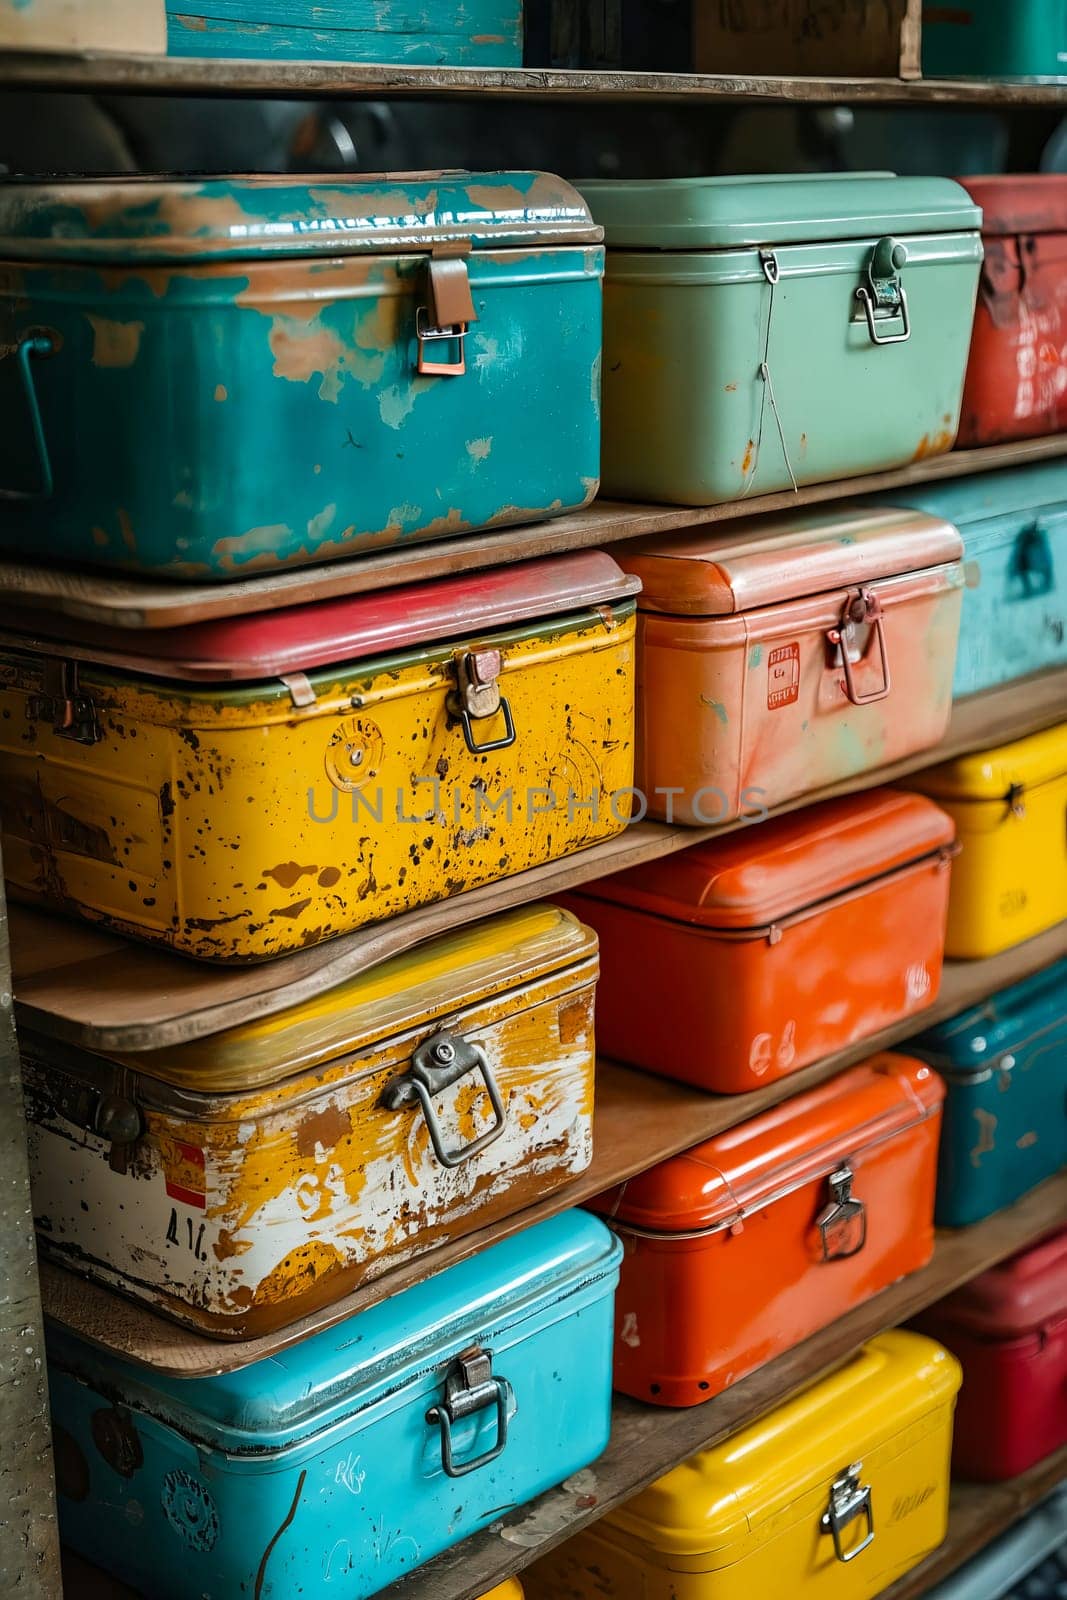 A row of colorful metal boxes stacked on top of each other. The boxes are of different colors and sizes, and they appear to be old and worn. Scene is nostalgic and somewhat whimsical. Generative AI